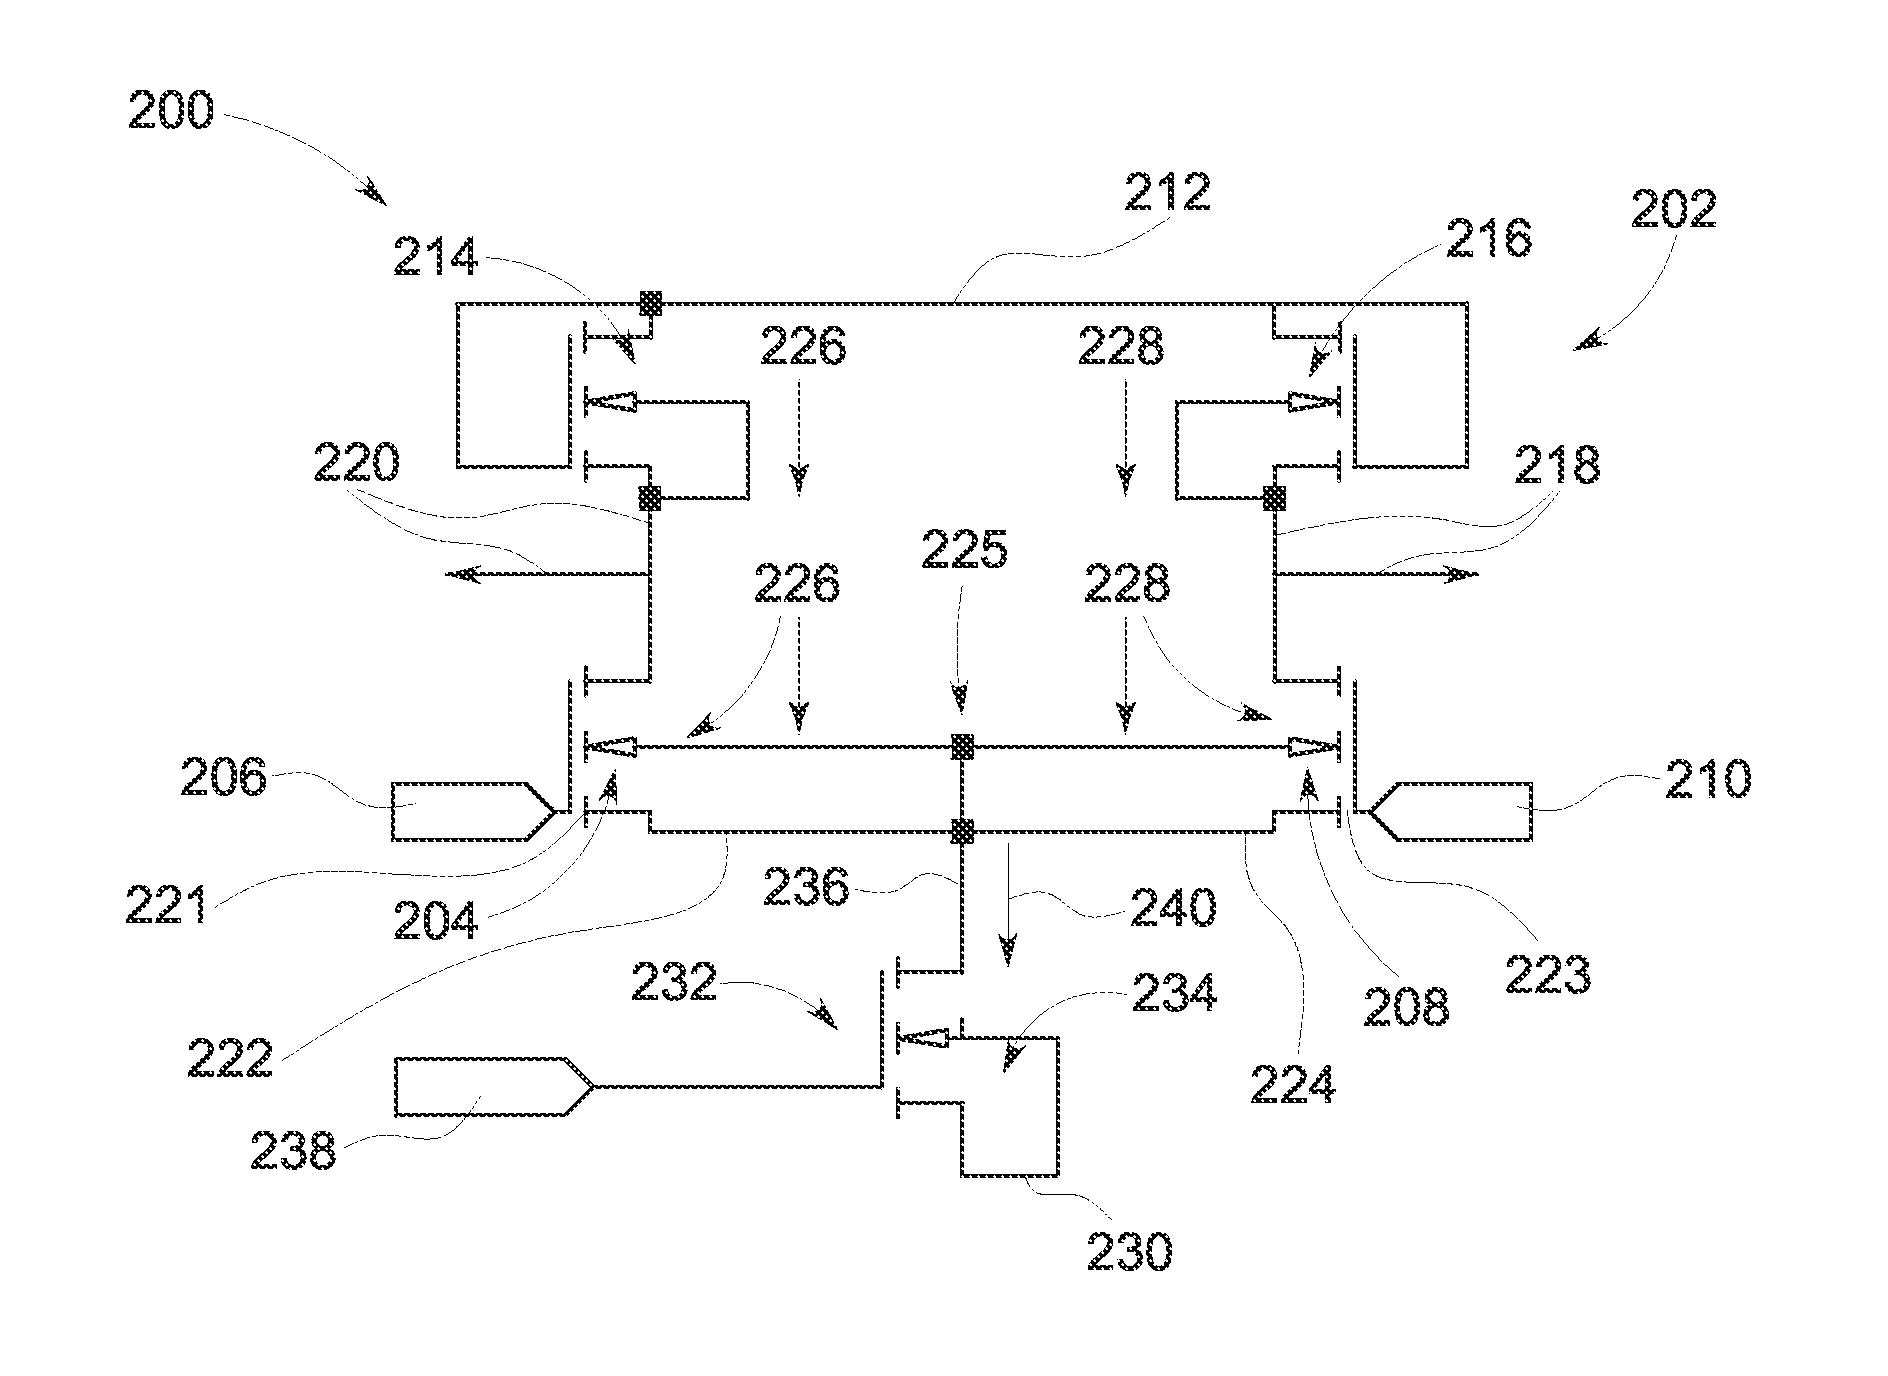 Integrated circuit and method of fabricating same